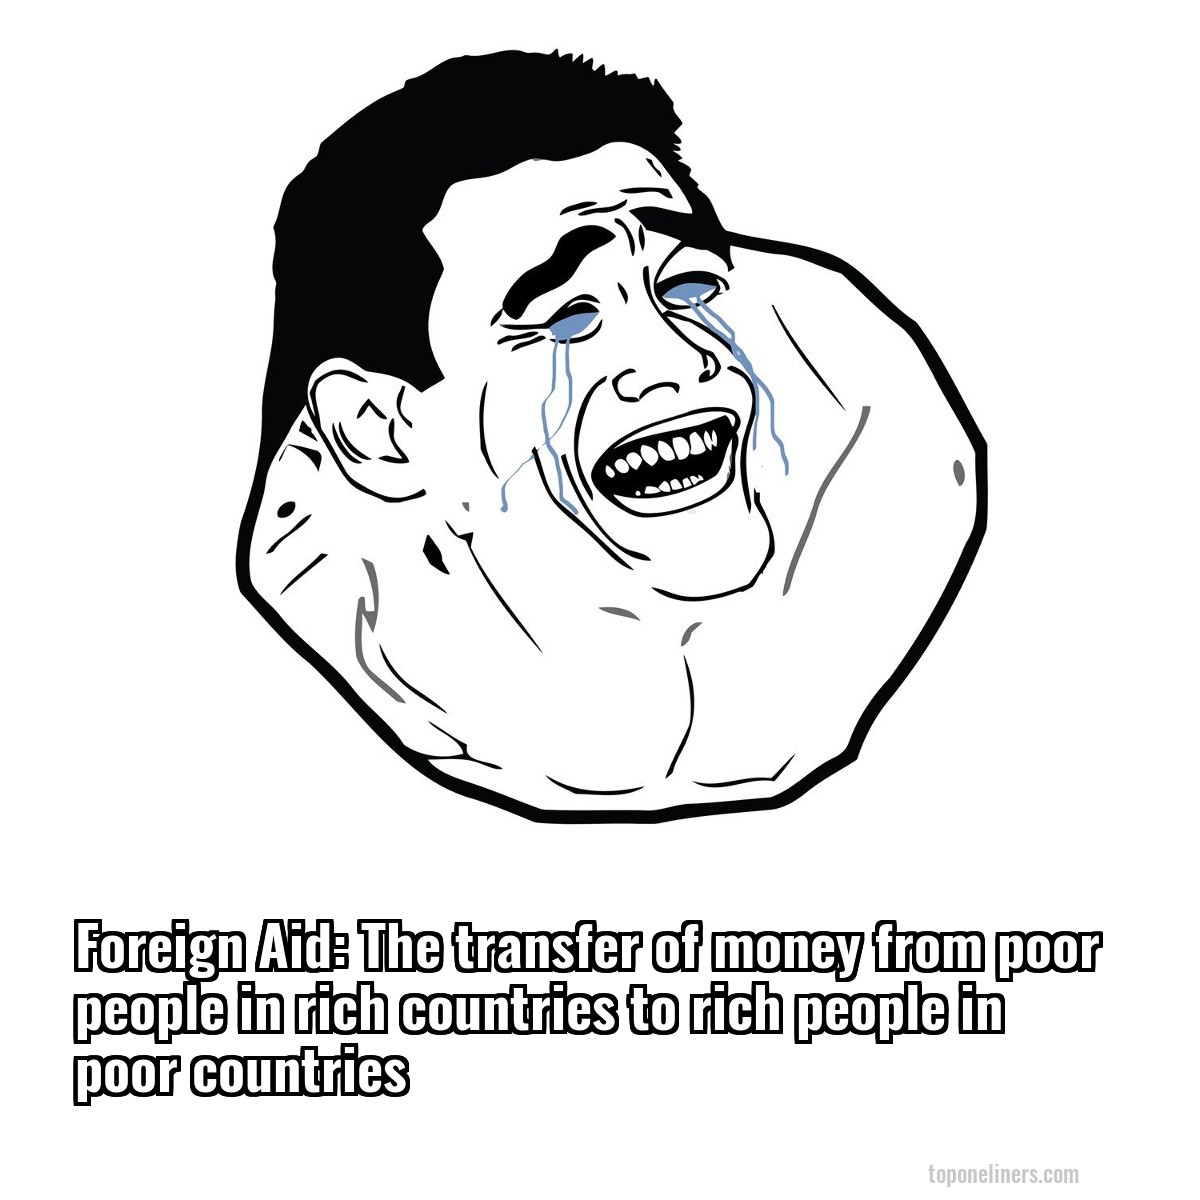 Foreign Aid: The transfer of money from poor people in rich countries to rich people in poor countries
